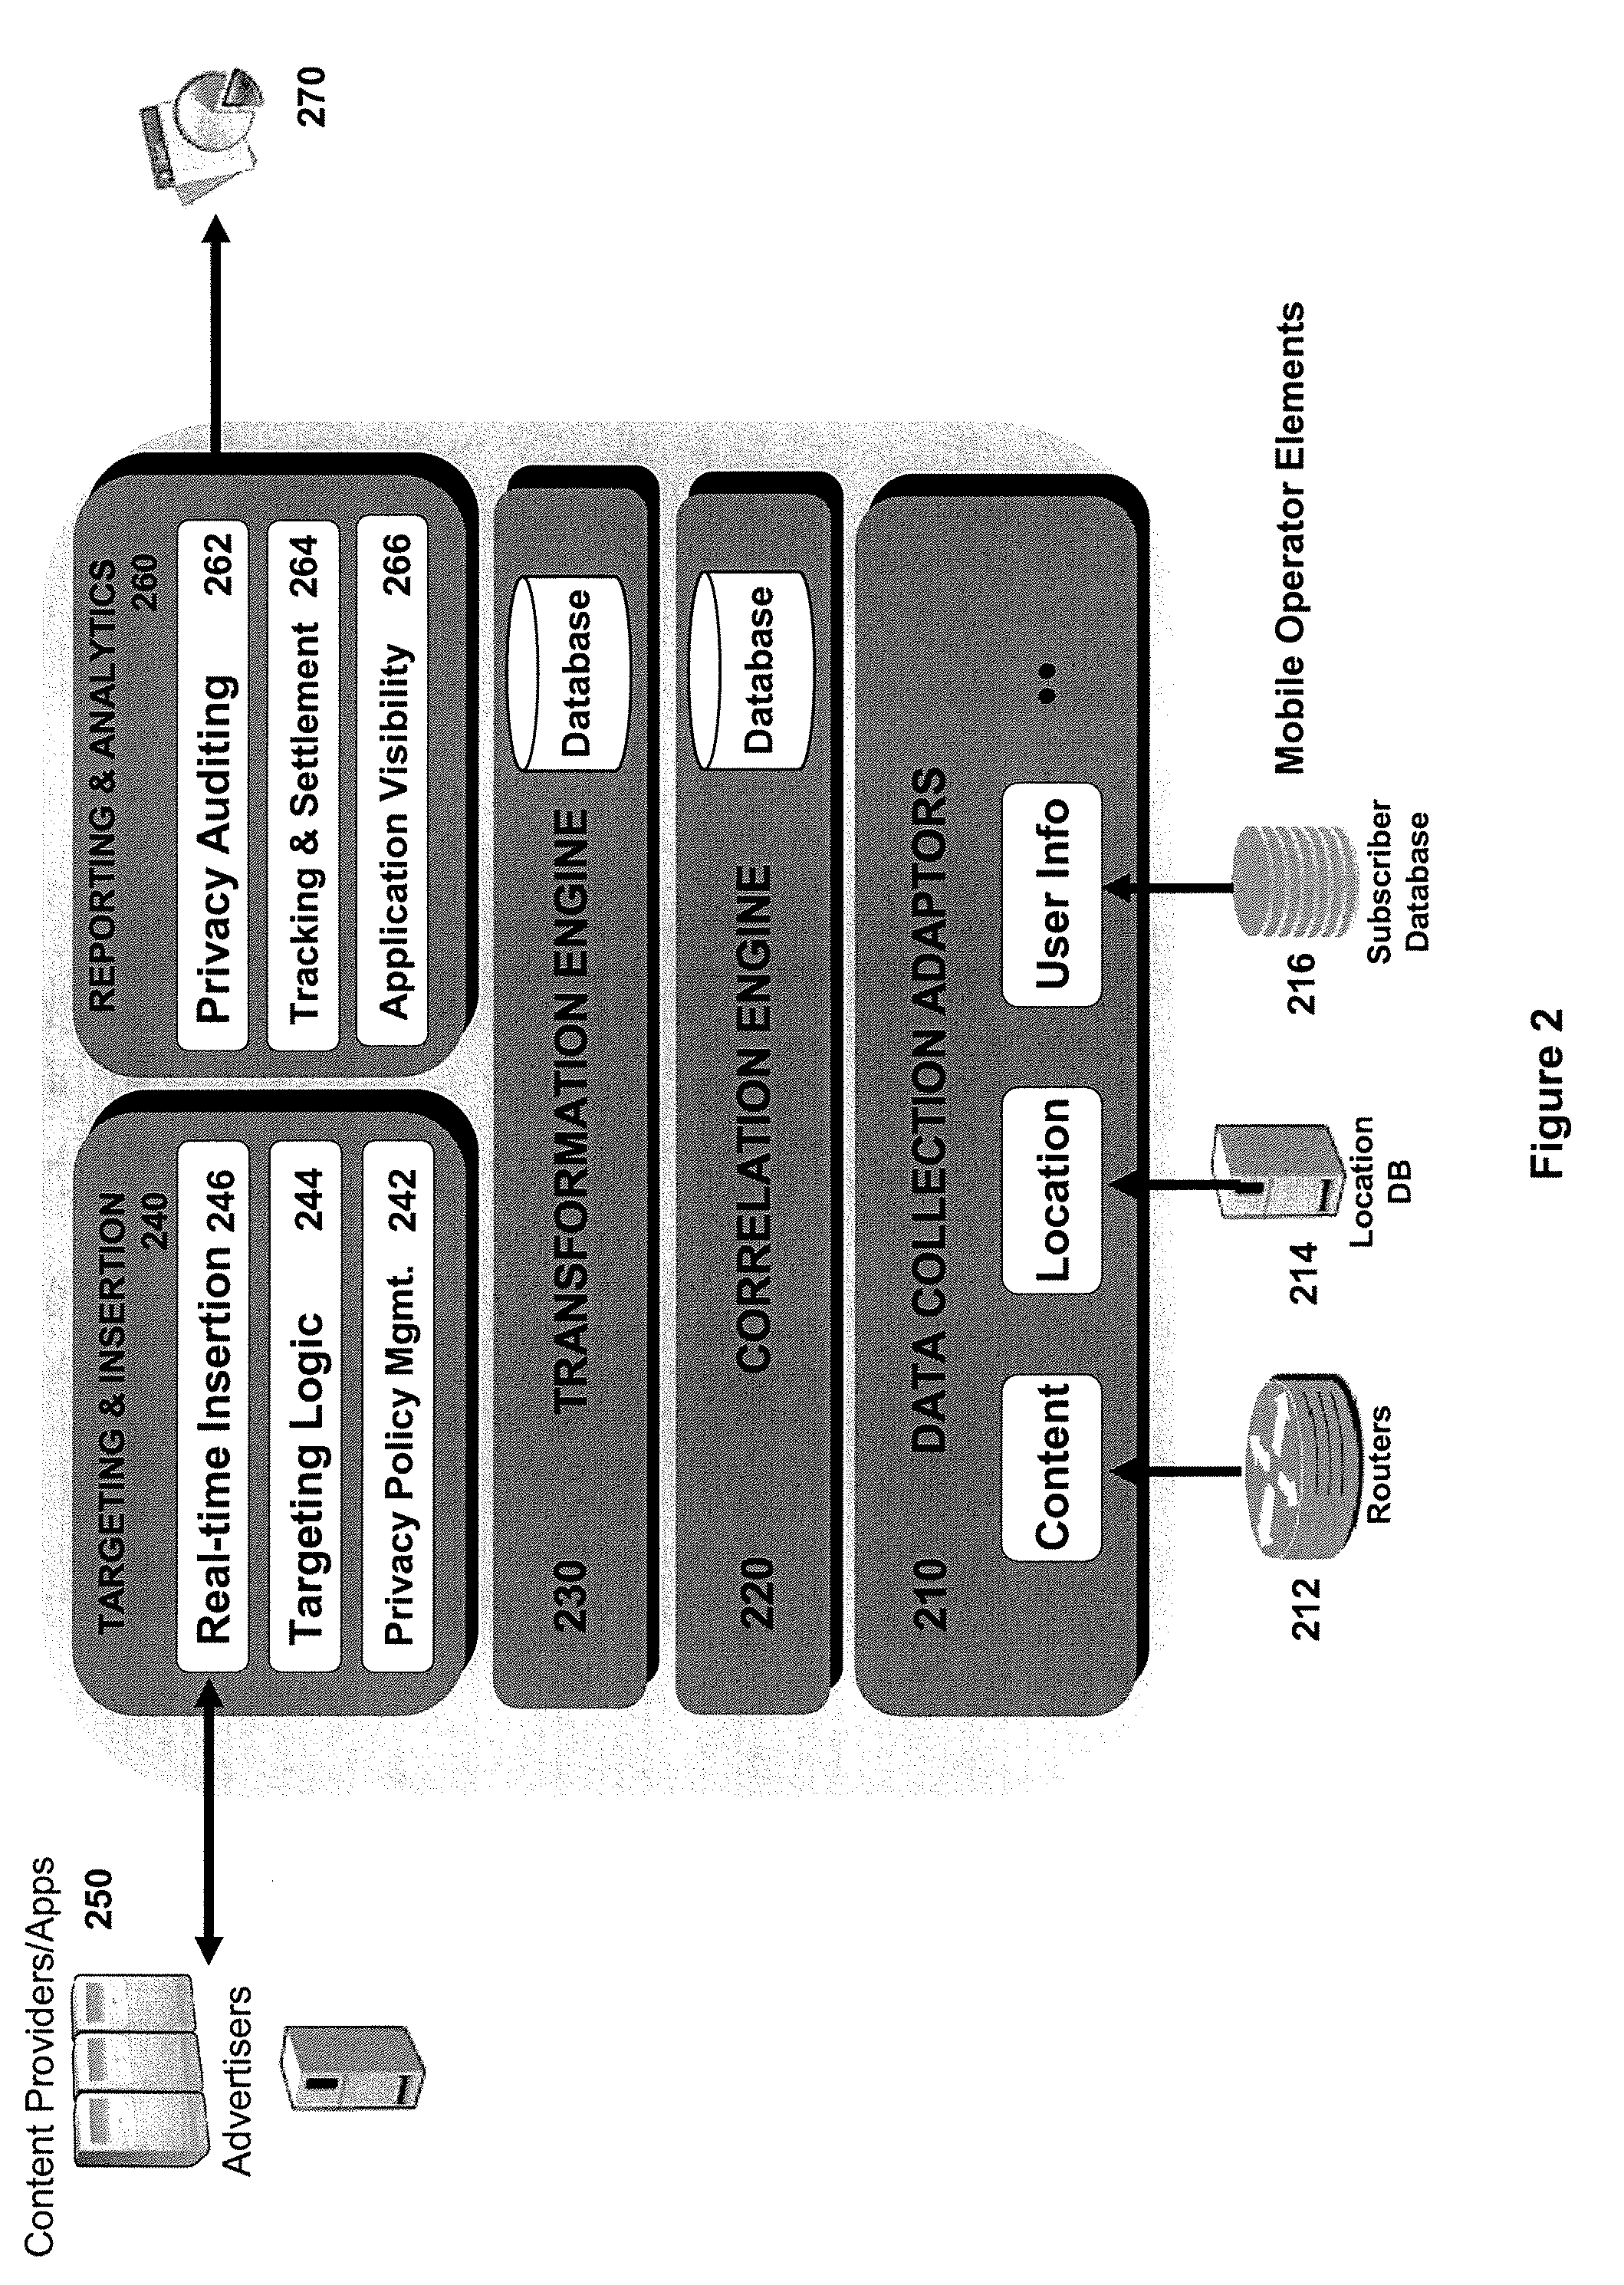 System and Method for Sharing Anonymous User Profiles with a Third Party